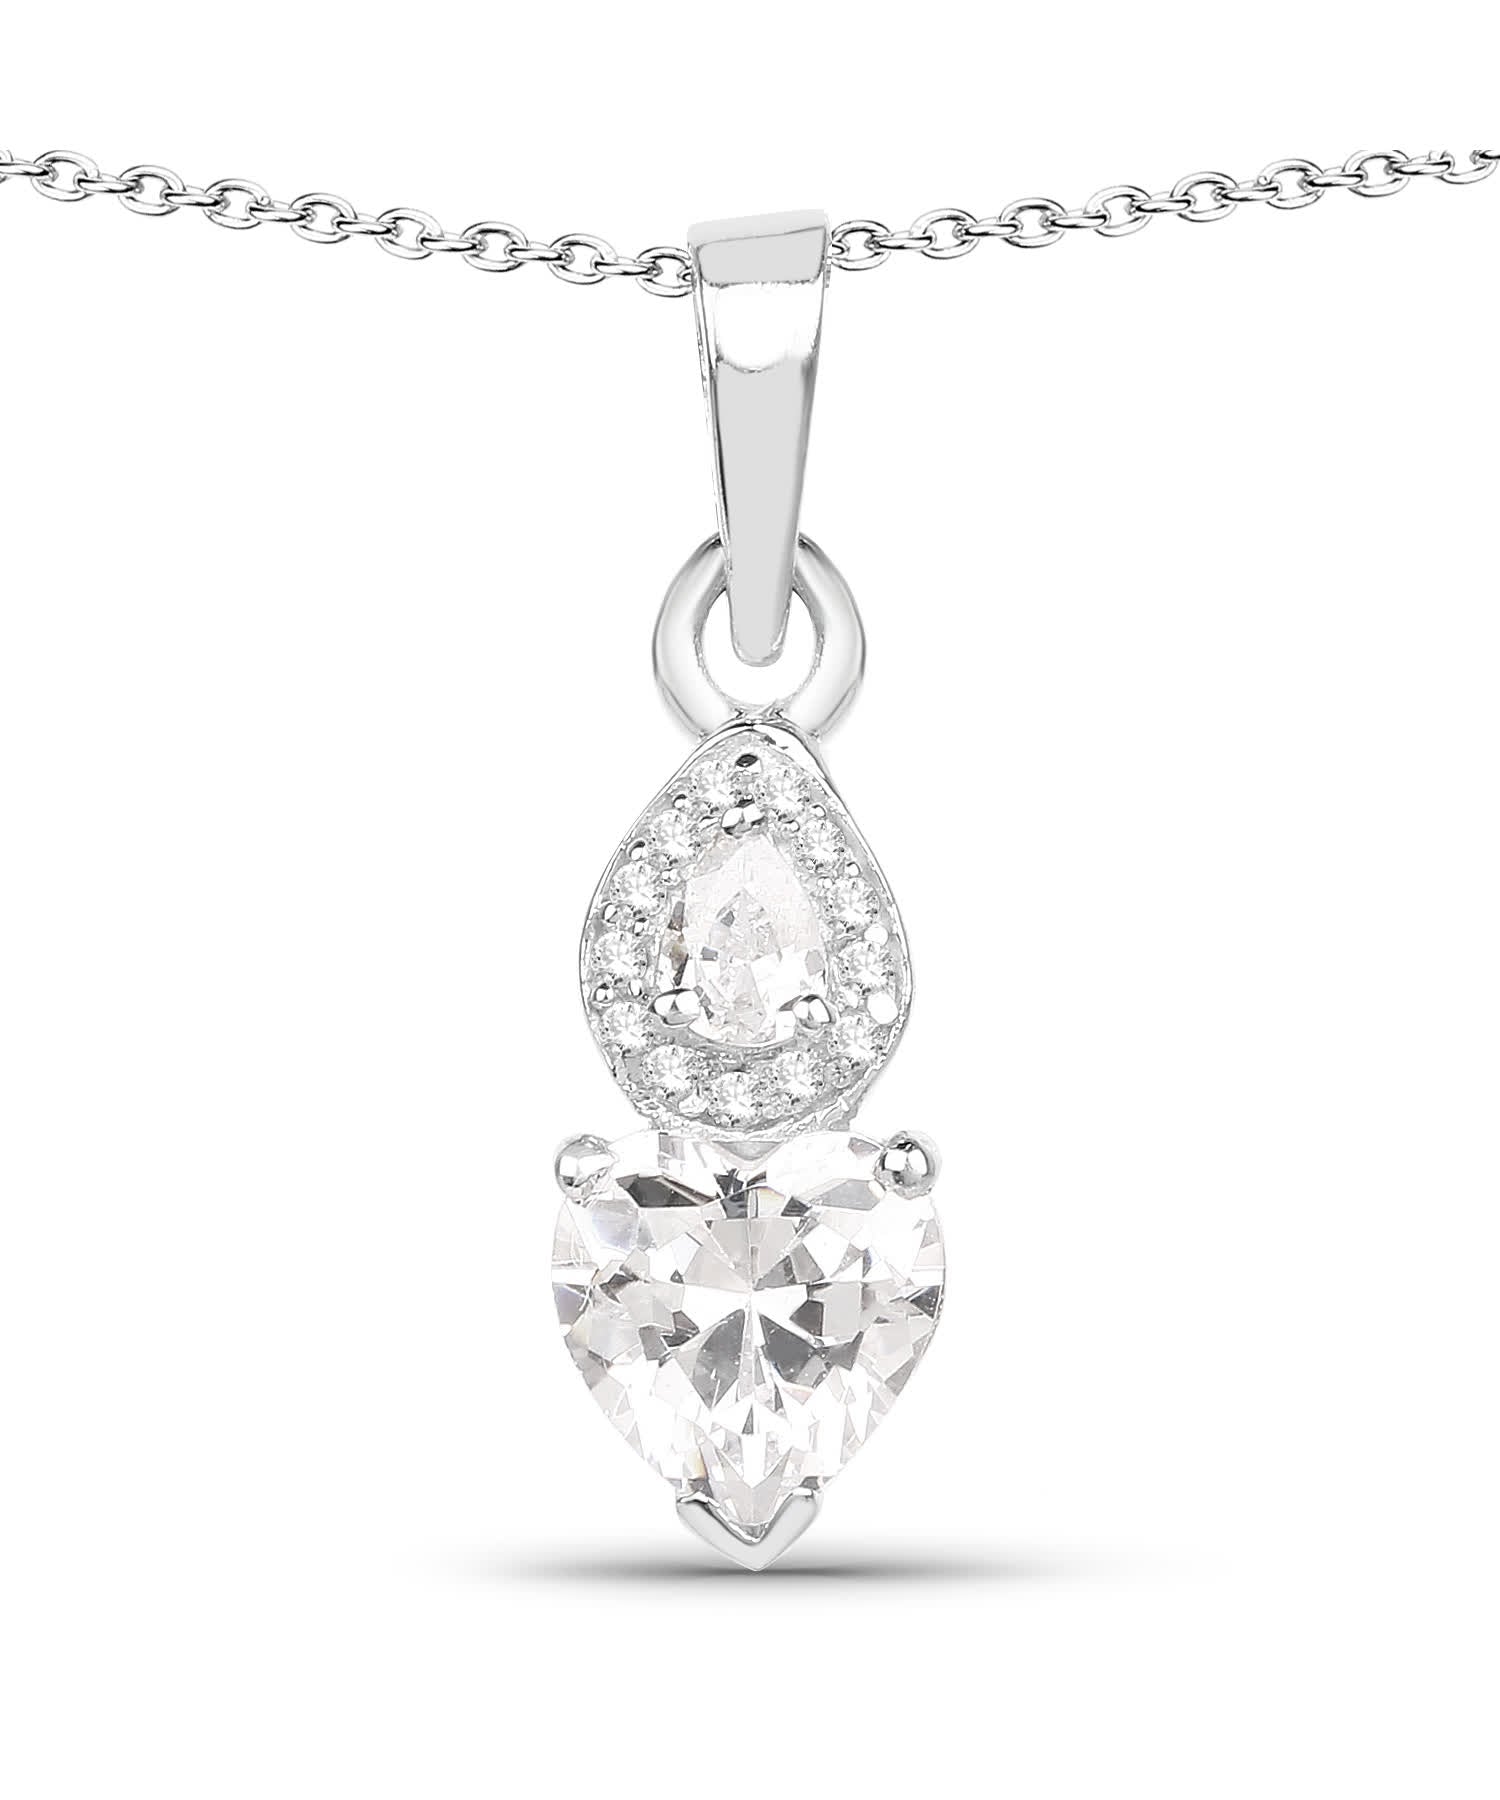 Brilliant Cut Cubic Zirconia Rhodium Plated 925 Sterling Silver Heart Pendant With Chain View 1